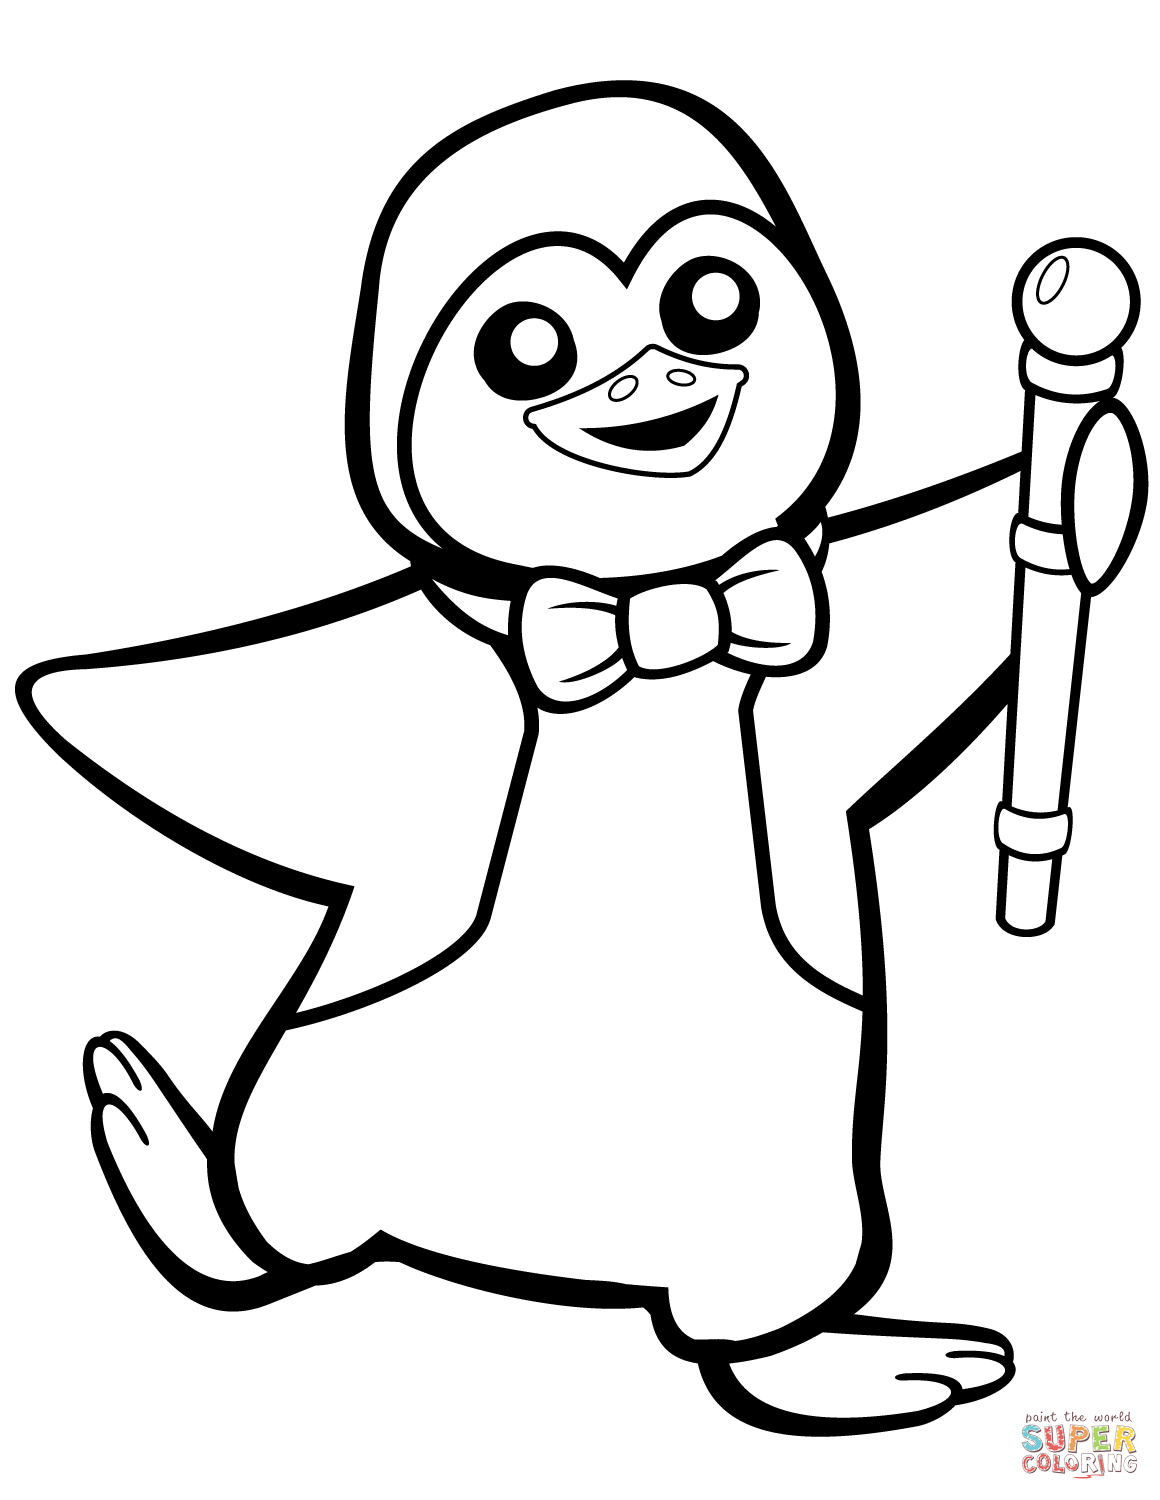 Bow Coloring Pages Funny Penguin With Bow Tie Coloring Page Free Printable Coloring Pages